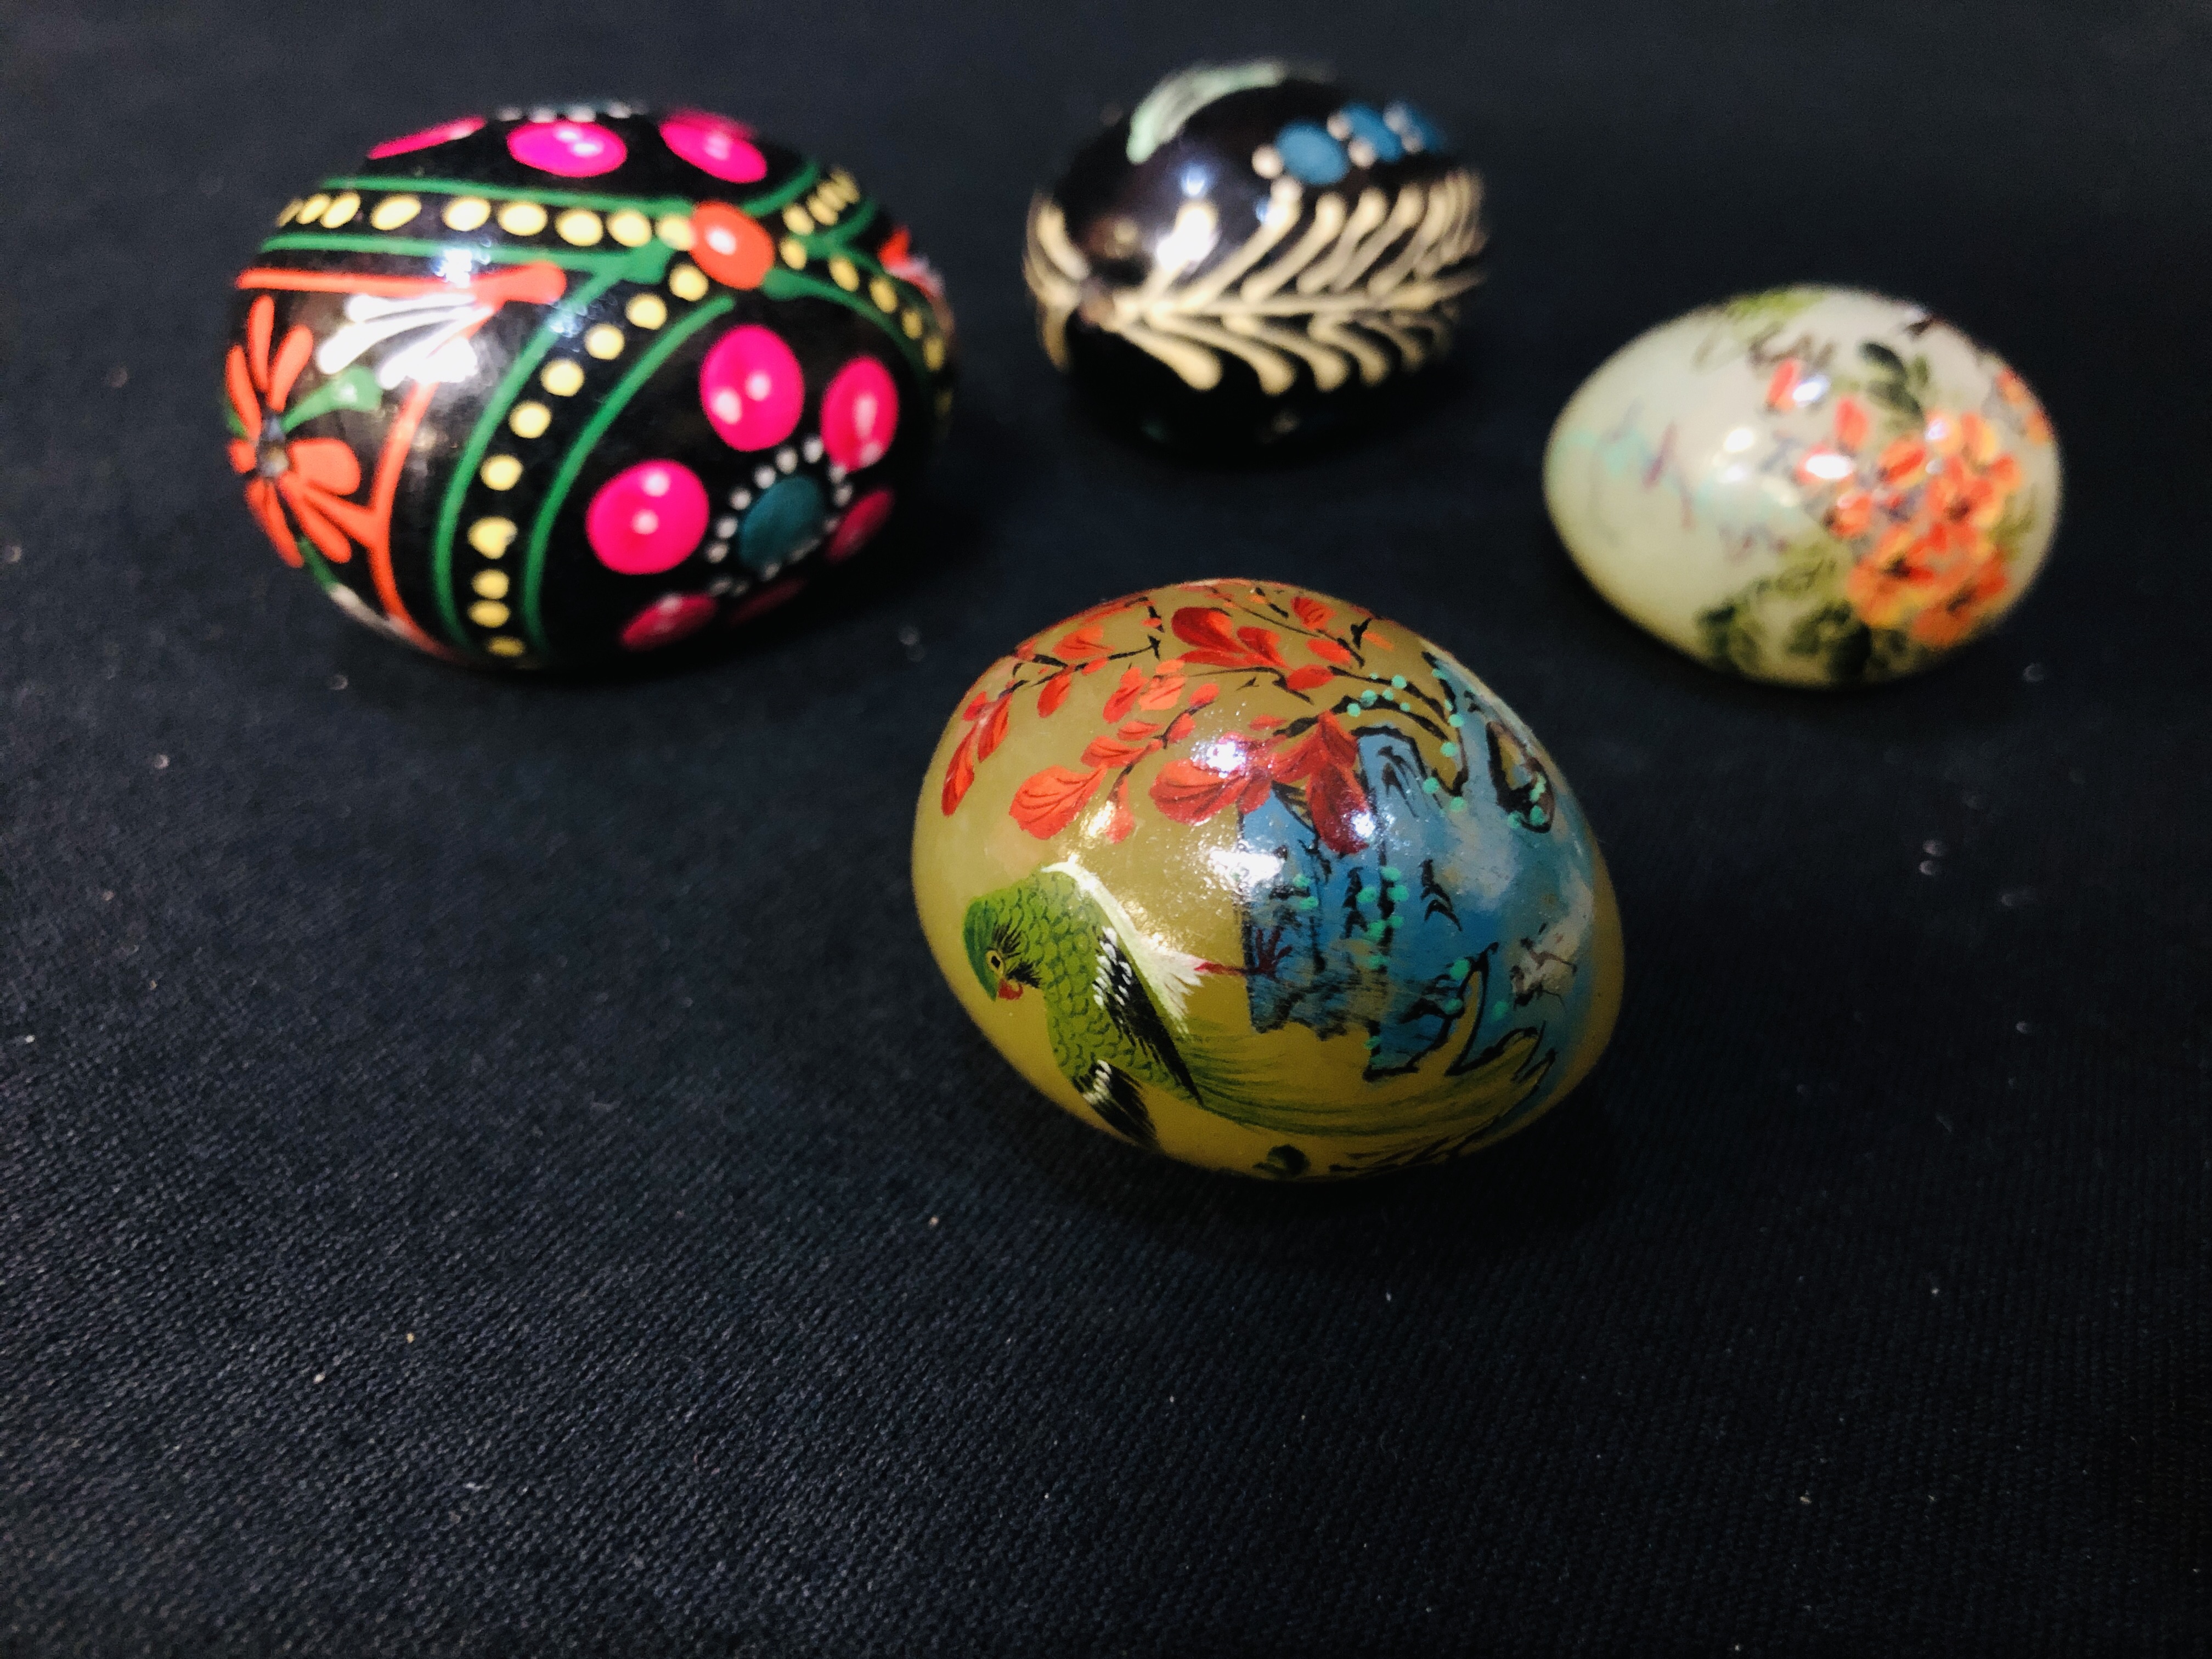 TWO POLISHED HARD STONE EGGS DECORATED WITH HANDPAINTED JAPANESE BIRDS AND FLOWERS + TWO HARD WOOD - Image 3 of 4